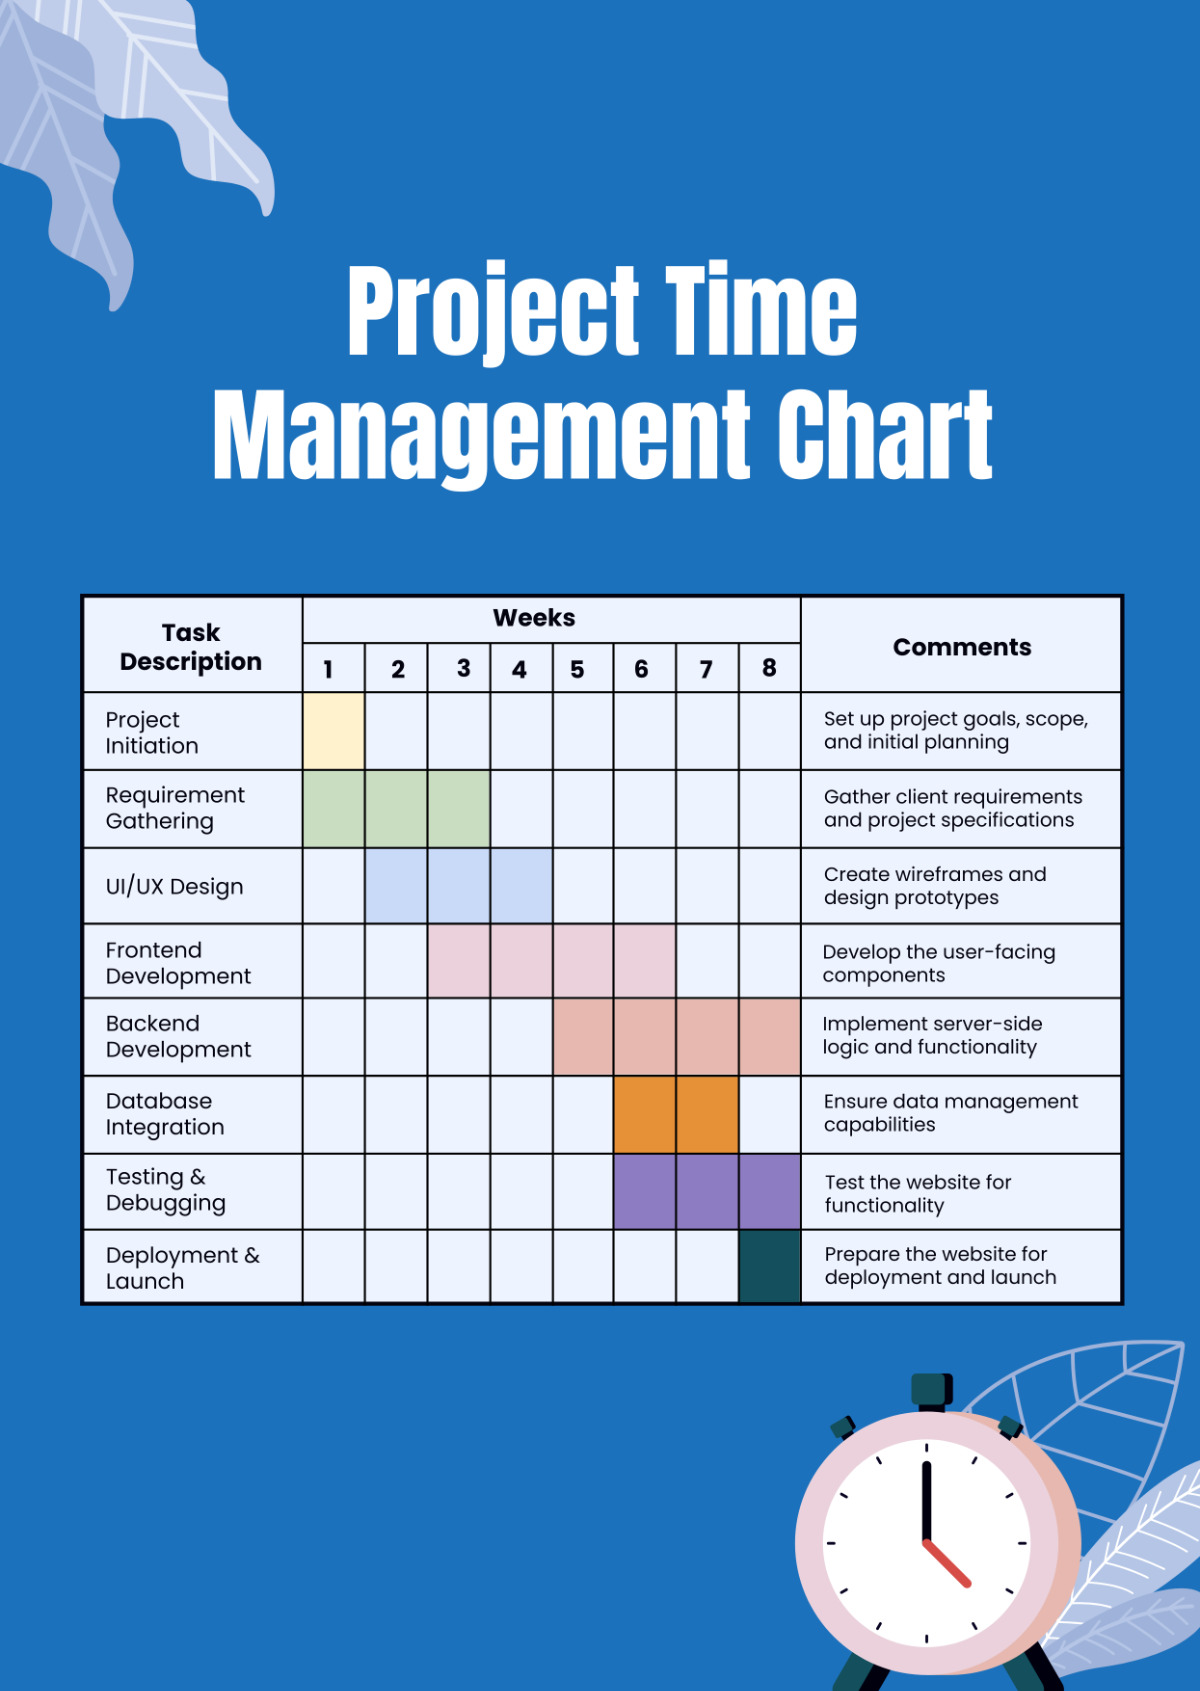 Project Time Management Chart